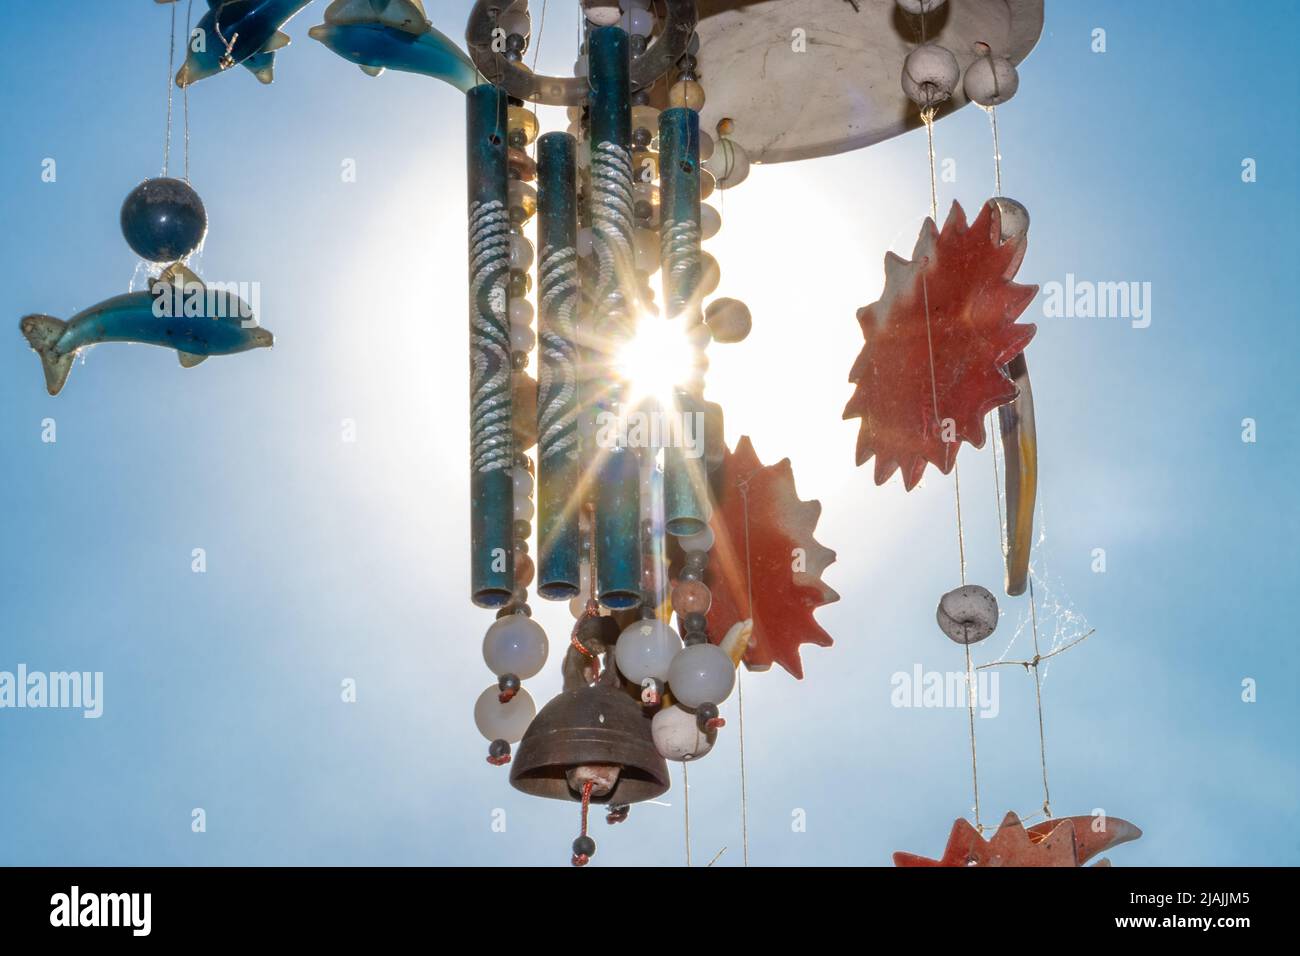 A chimes hanging against the blue sky with sun Stock Photo